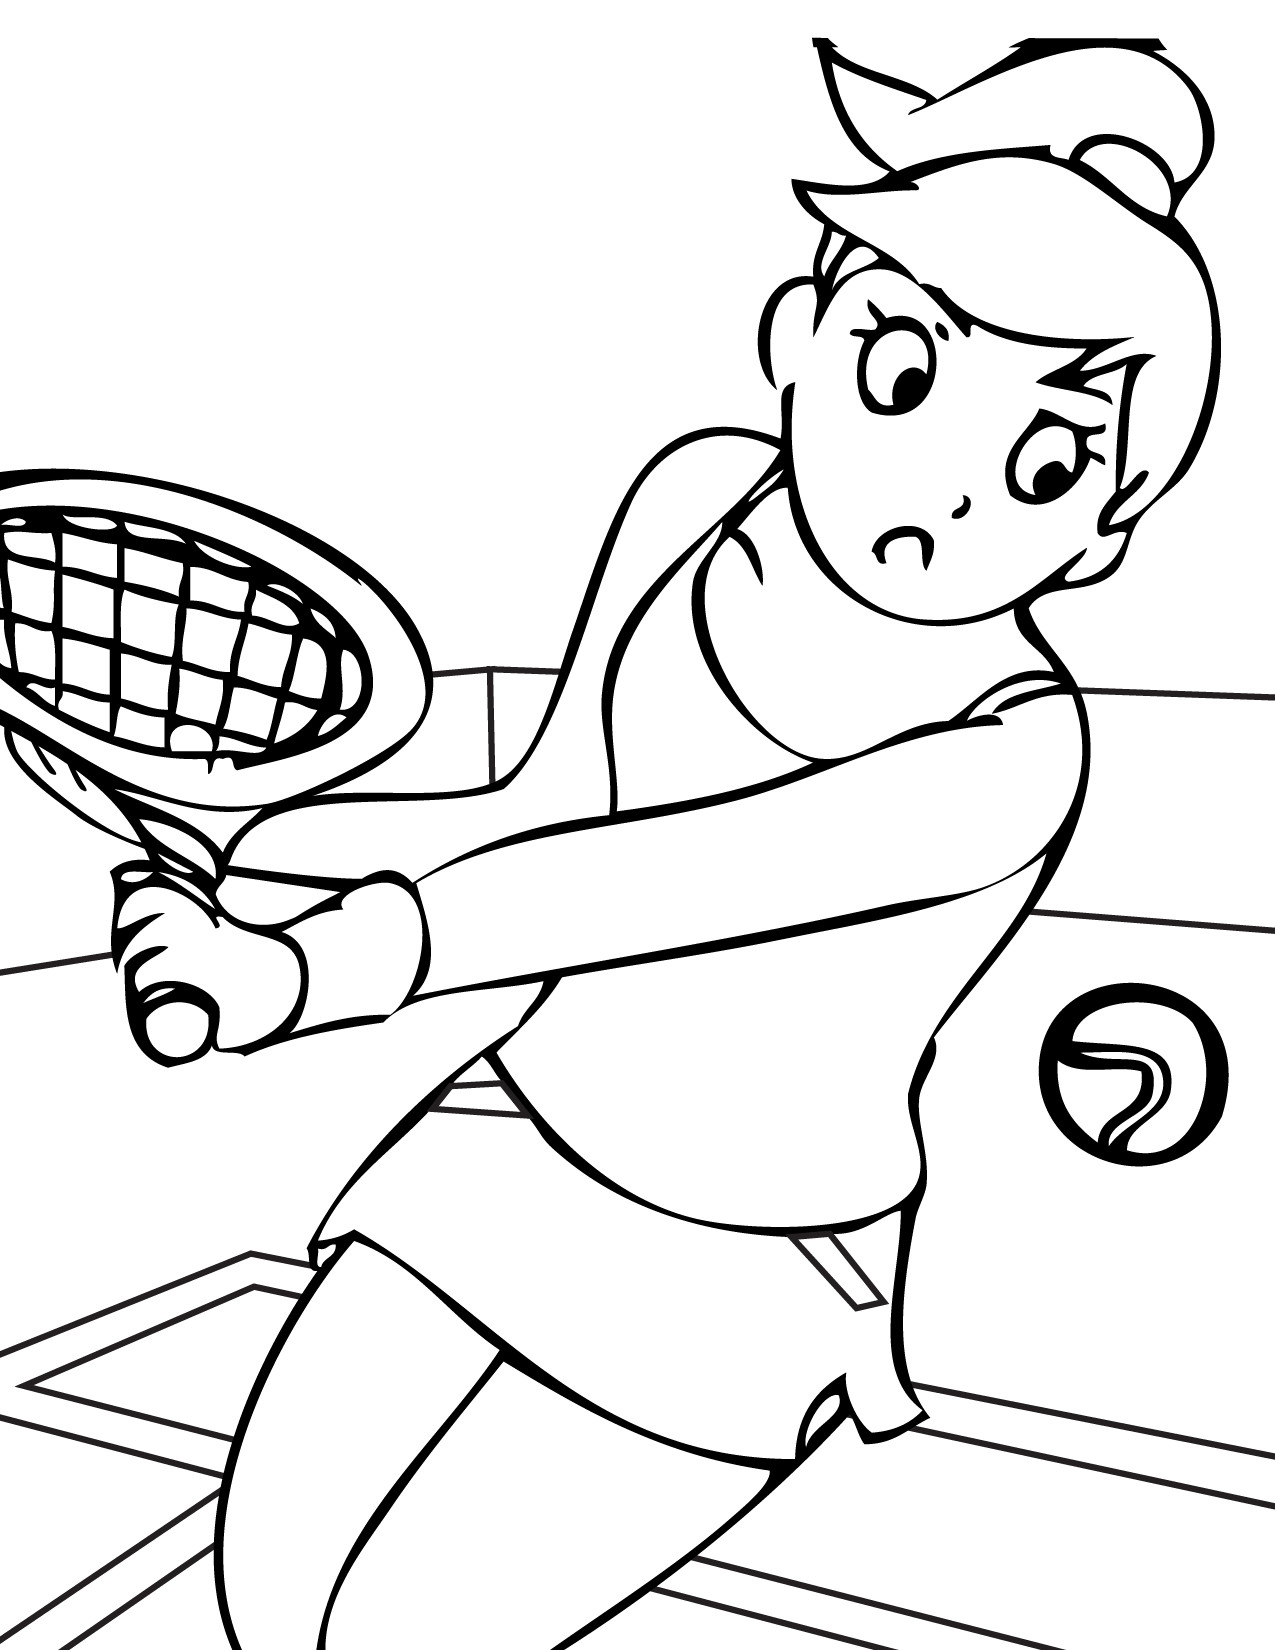 Softball Coloring Pages
 Free Printable Sports Coloring Pages For Kids